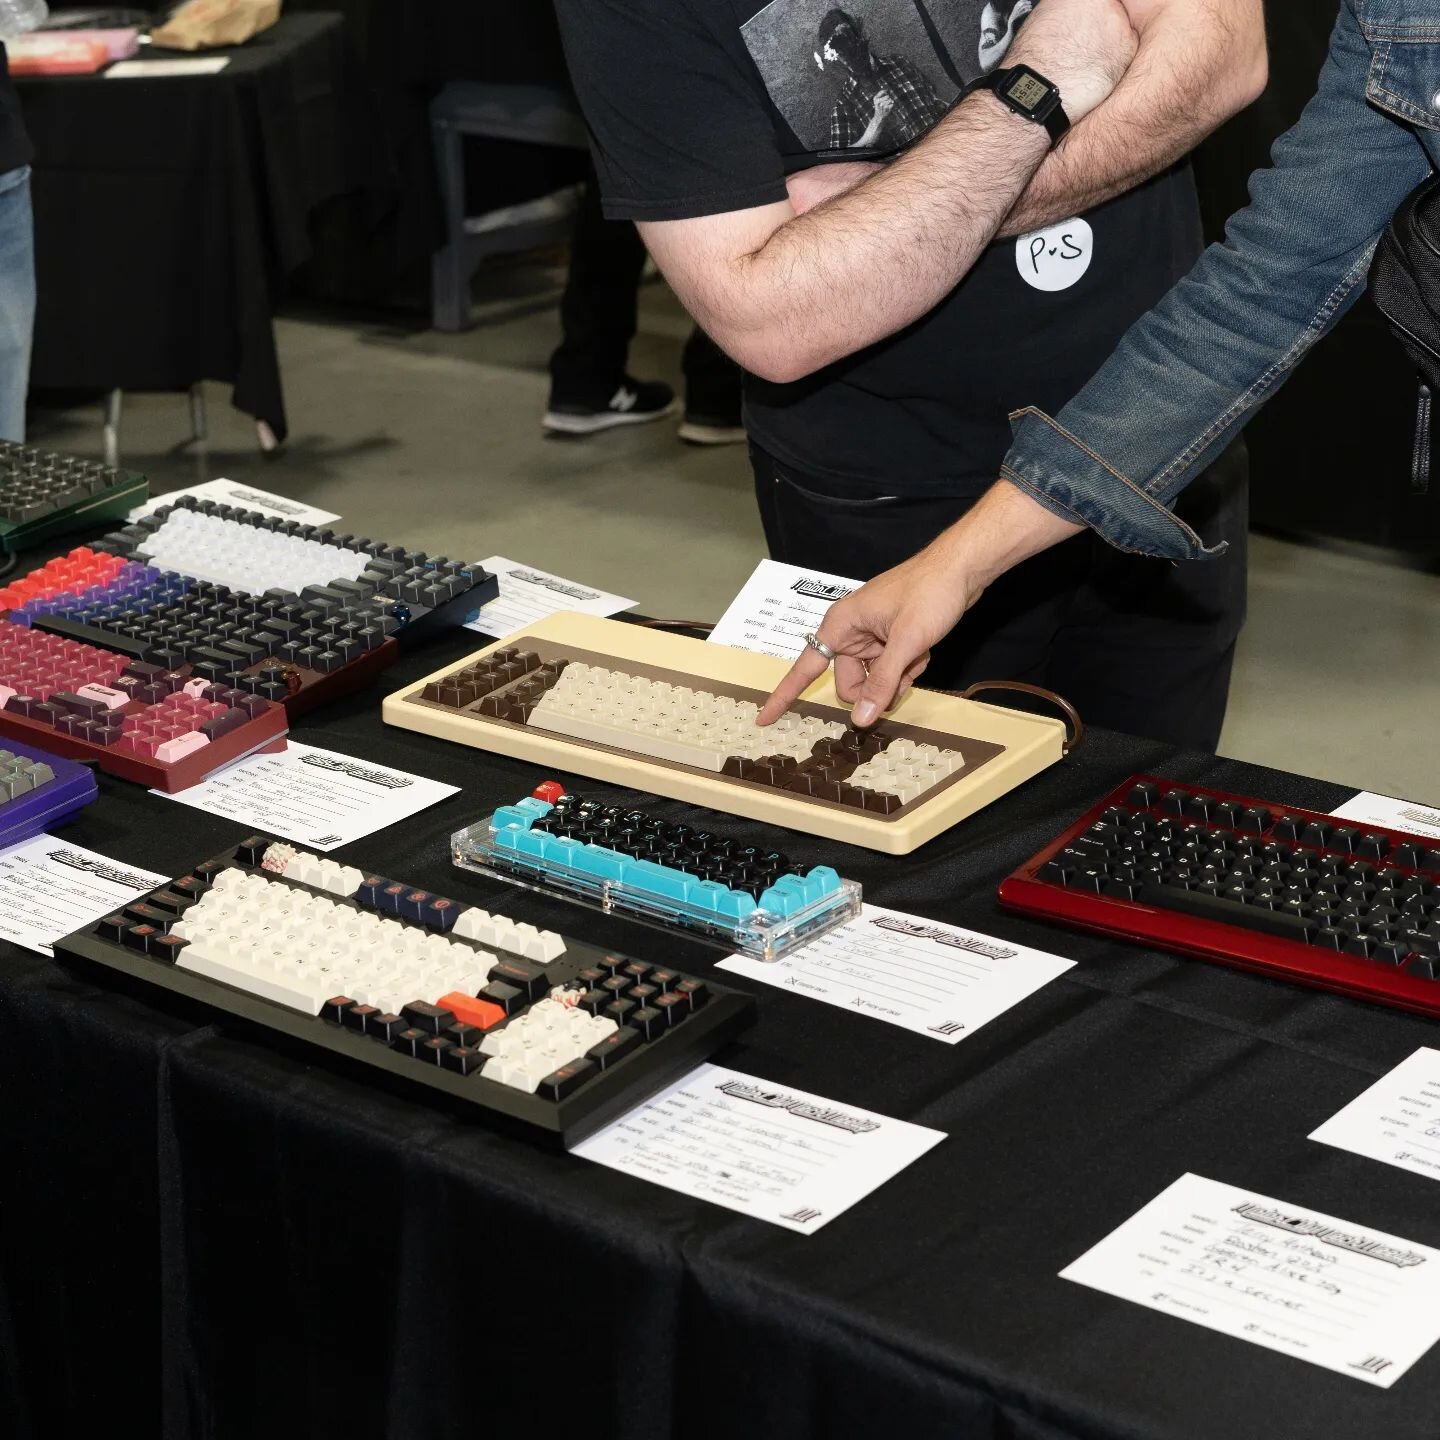 👀😳@thekey.company founder, Jason, brought his huge collection of old and new boards.

It was so cool seeing boards with unique use cases and out of print switches!

📸@captain.sterling

.
.
.
.
.
.
.
.
.
.
.
#motorcitymechmeetup2022 #motorcity #key